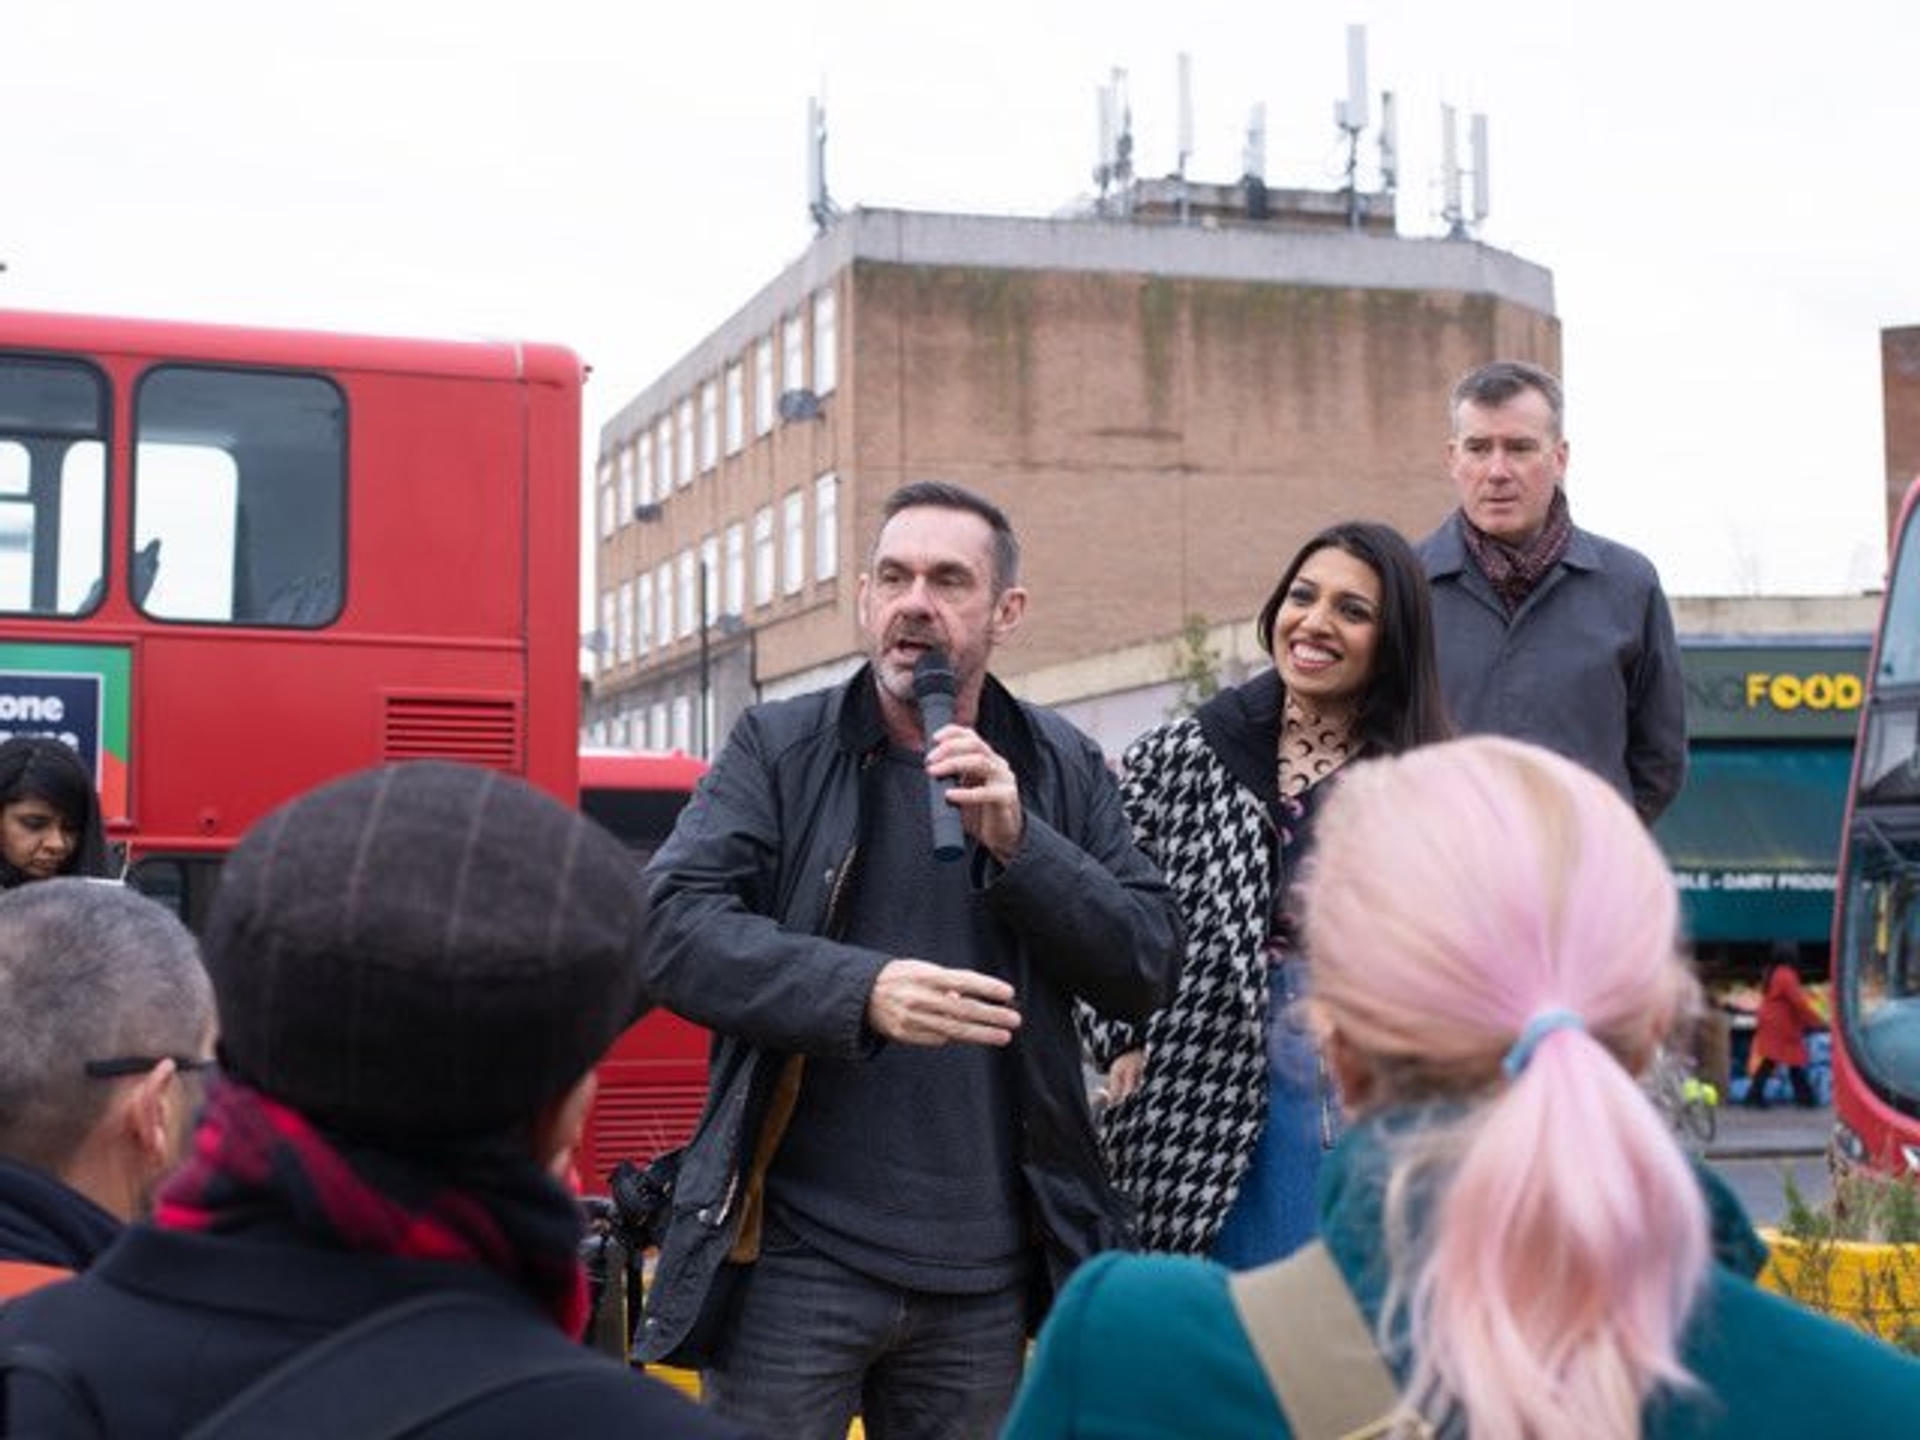 @paulmasonnews Nov 17 I was in Chingford & Woodford Green with @faizashaheen today - 00s of canvassers turned out. Labour is a mass movement now. She will end IDS's reign of cruelty against working class people - photos by @Sewell And (gratitude to Greens for standing down)